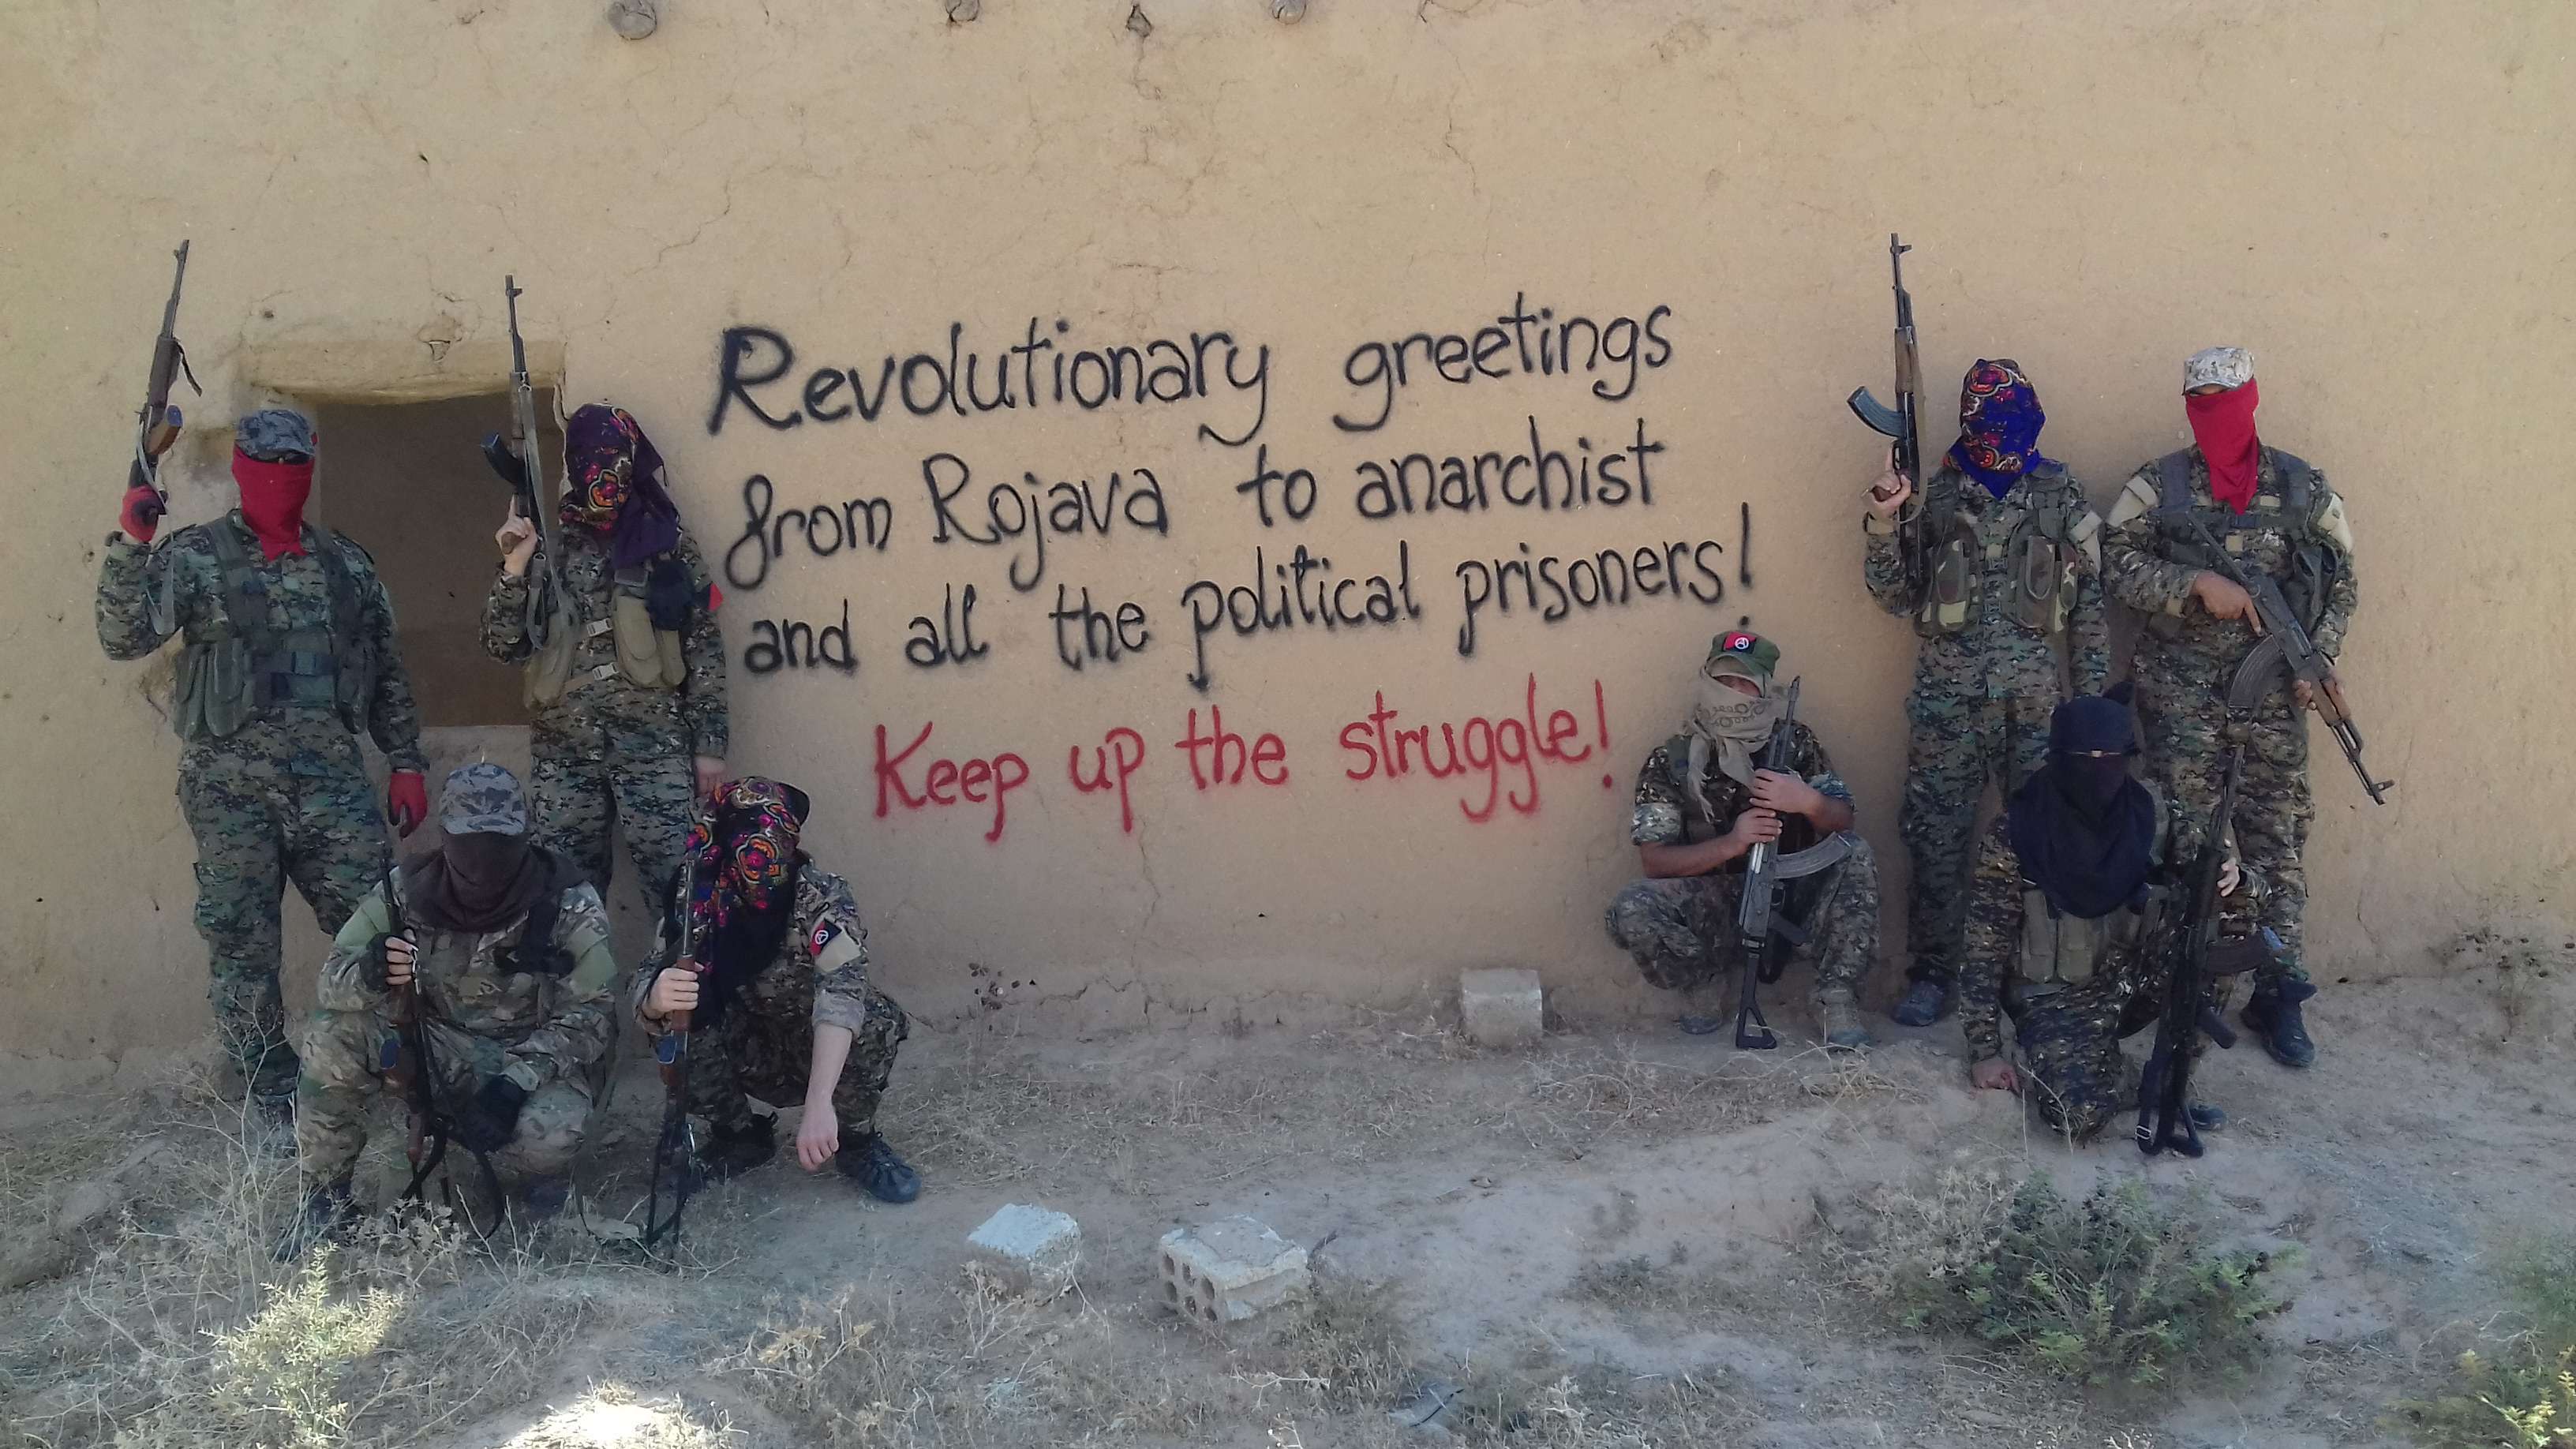 Revolutionary greetings from Rojava to anarchist and all the political prisoners!